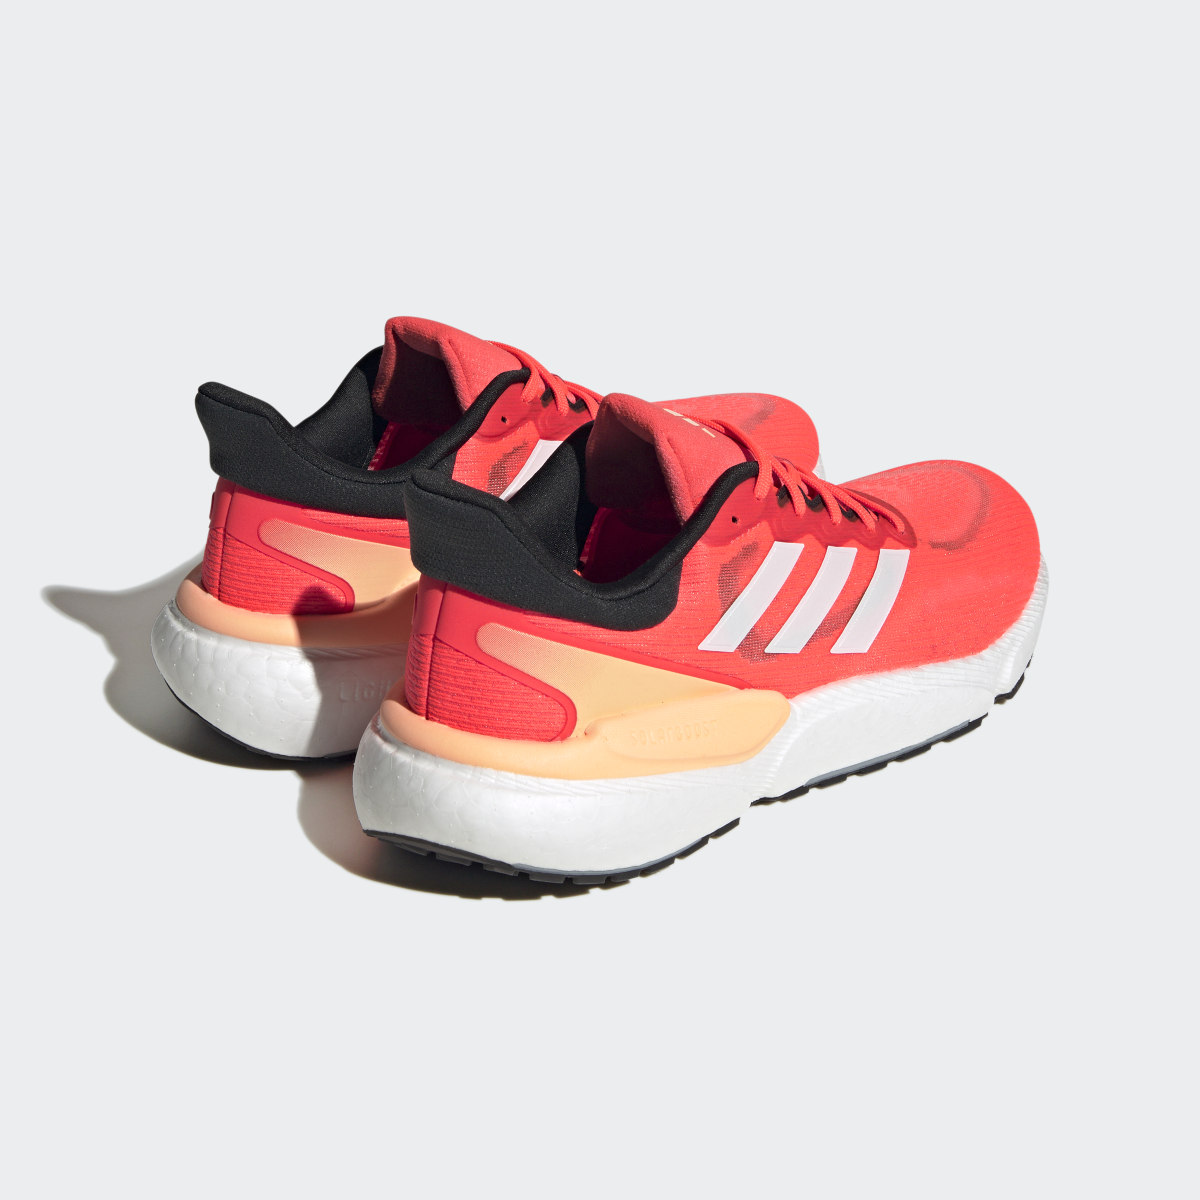 Adidas Solarboost 5 Shoes. 6